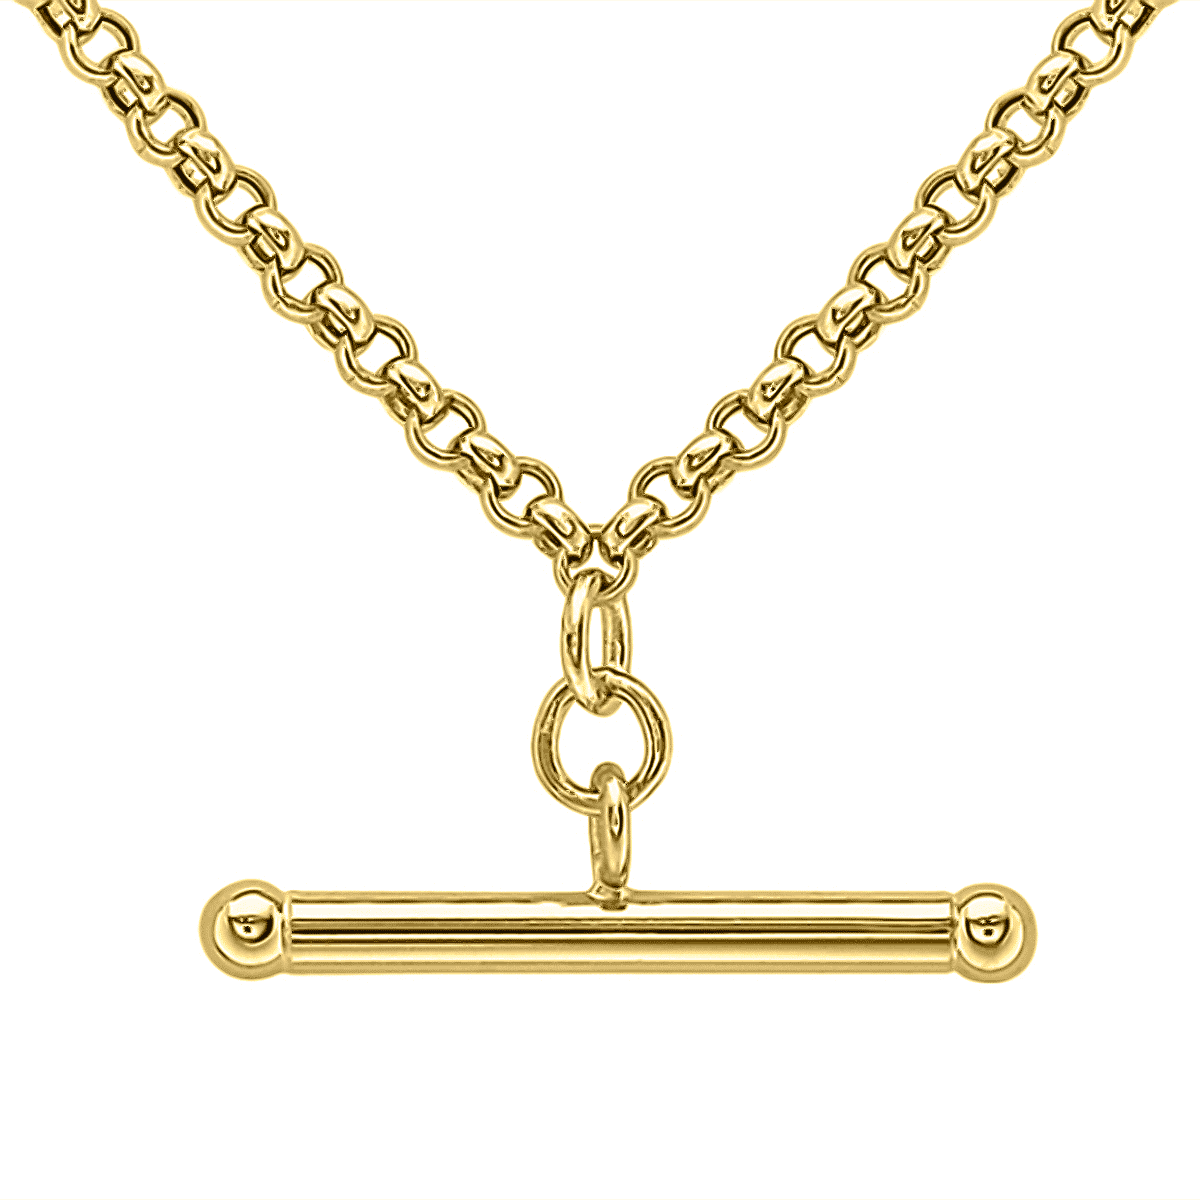 Italian Made One Time Close Out Deal- 9K Yellow Gold Belcher Albert Necklace (Size - 18), Gold Wt. 4.2 Gms